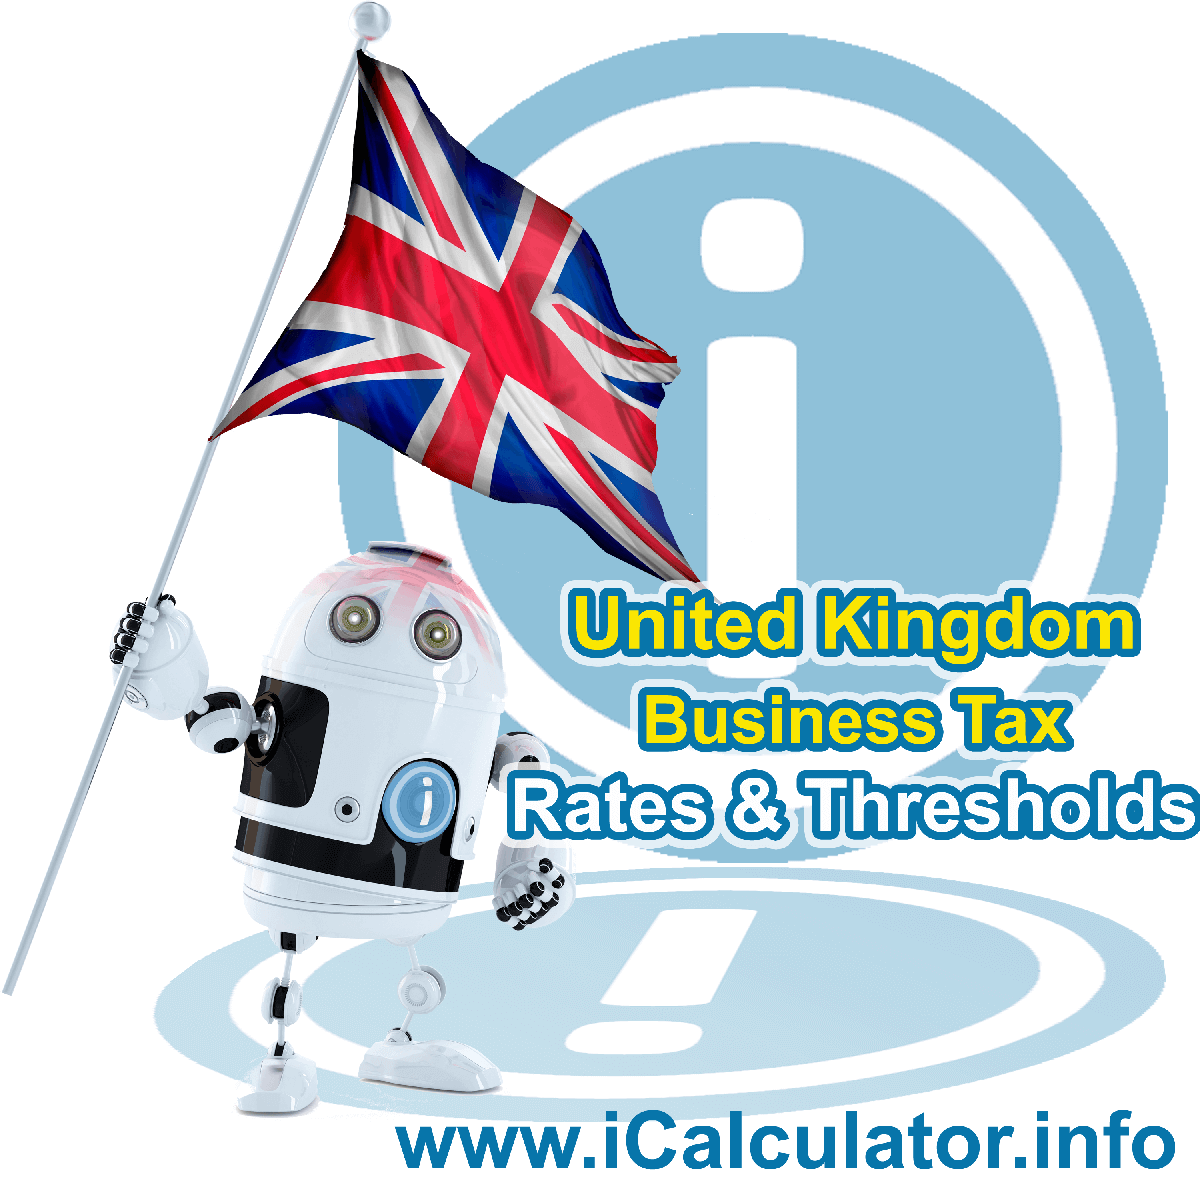 United Kingdom Corporation Tax Rates in 2012. This image shows the United Kingdom flag and information relating to the corporation tax formula for the United Kingdom Corporation Tax Calculator in 2012